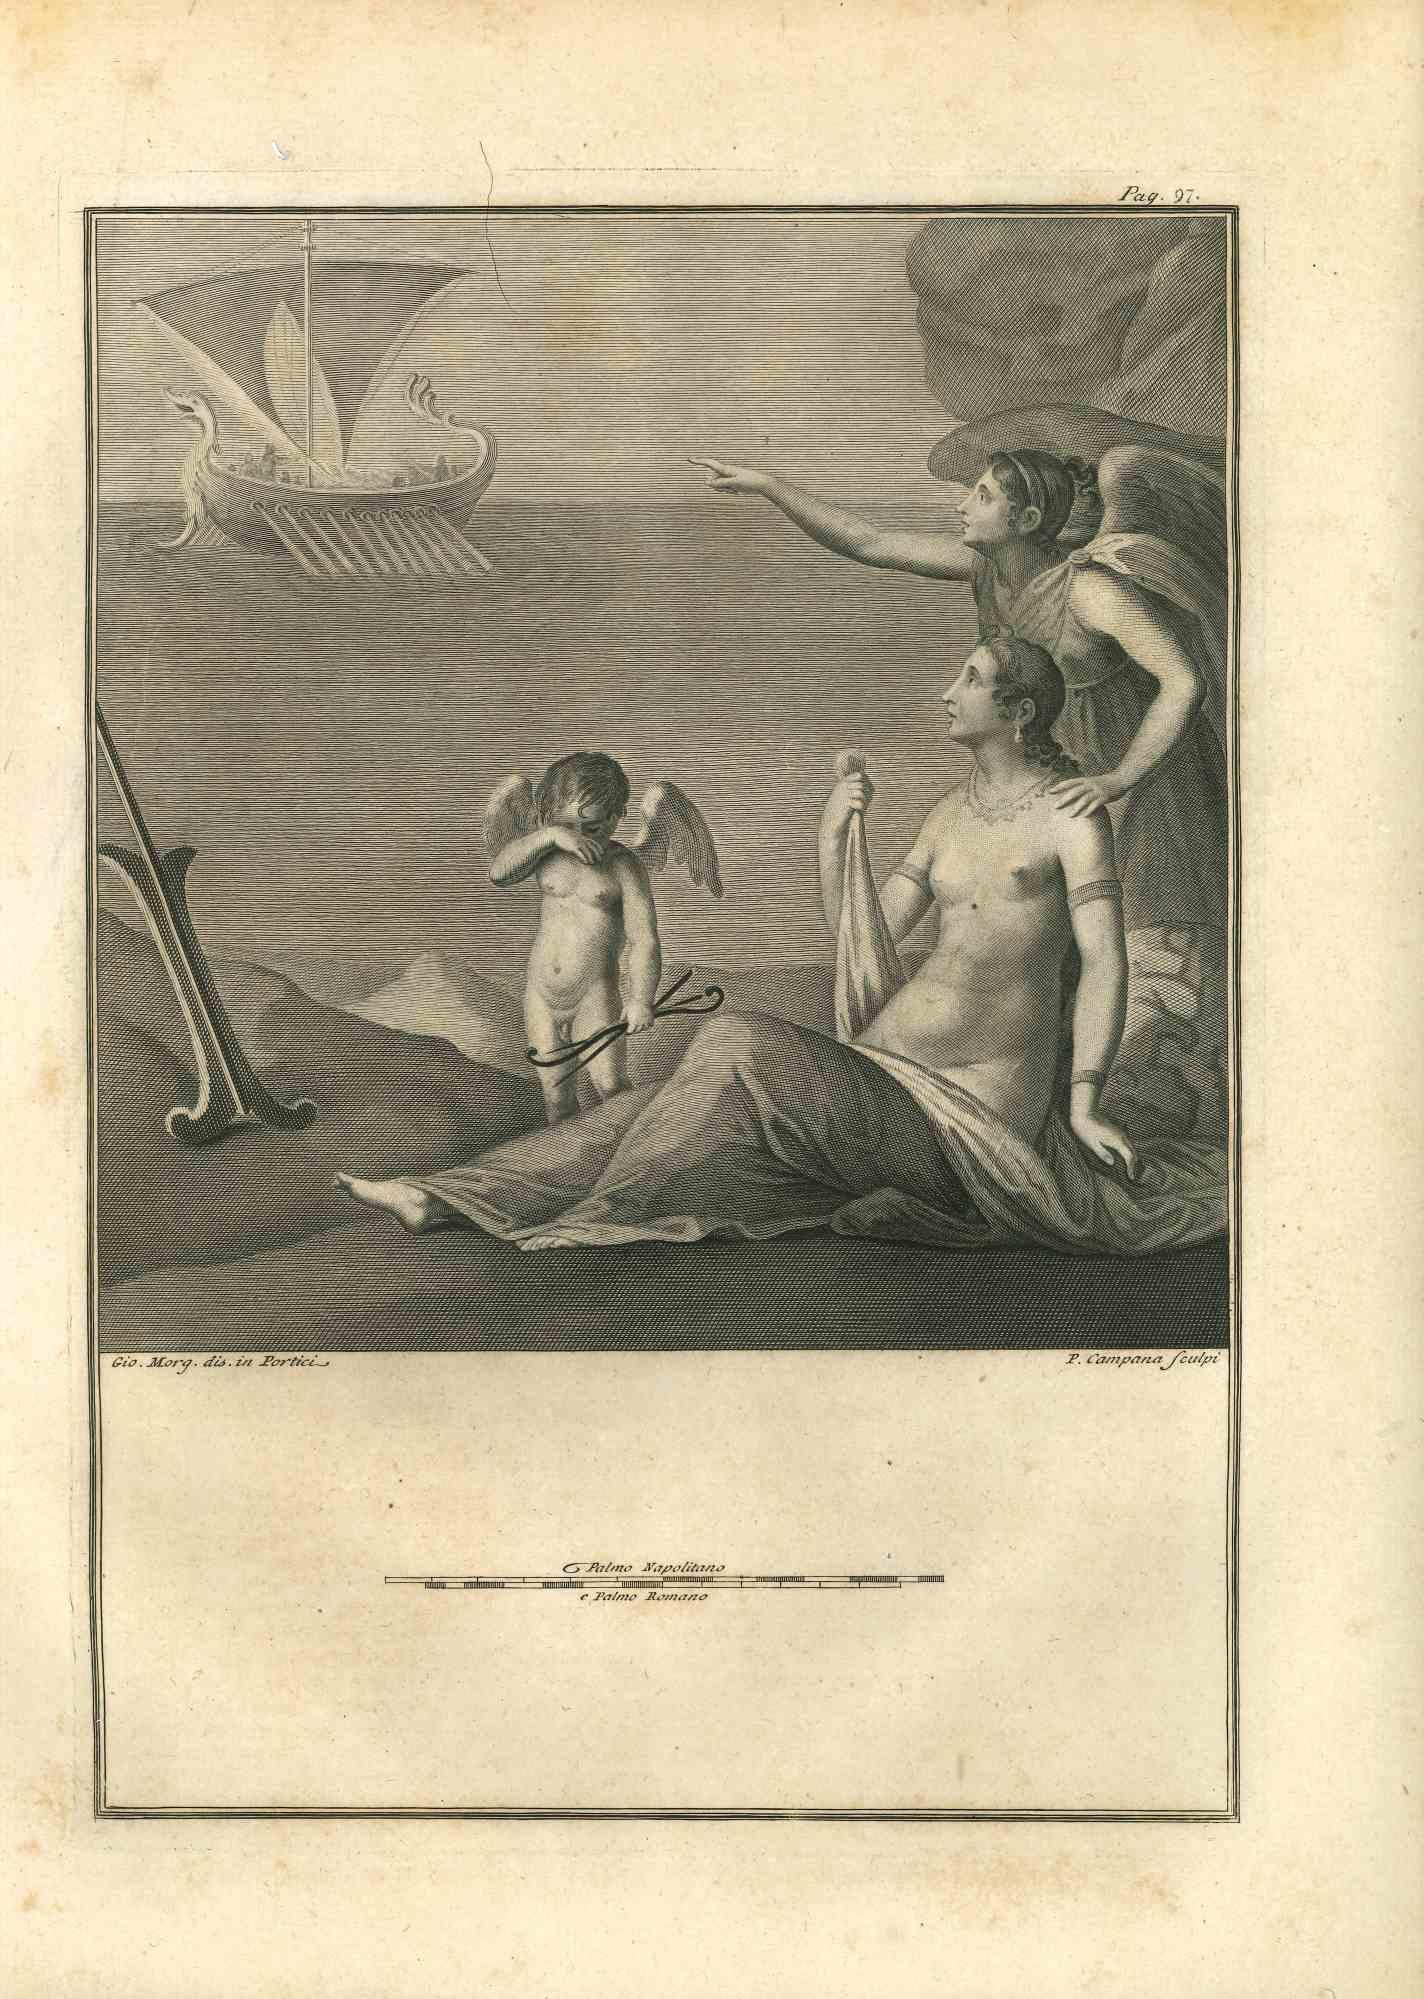 Odysseus ship and goddess on the shore from the series "Antiquities of Herculaneum", is an original etching on paper realized by P.  Campana in the 18th century.

Signed on the plate.

Good conditions except for some minor stains.

The etching